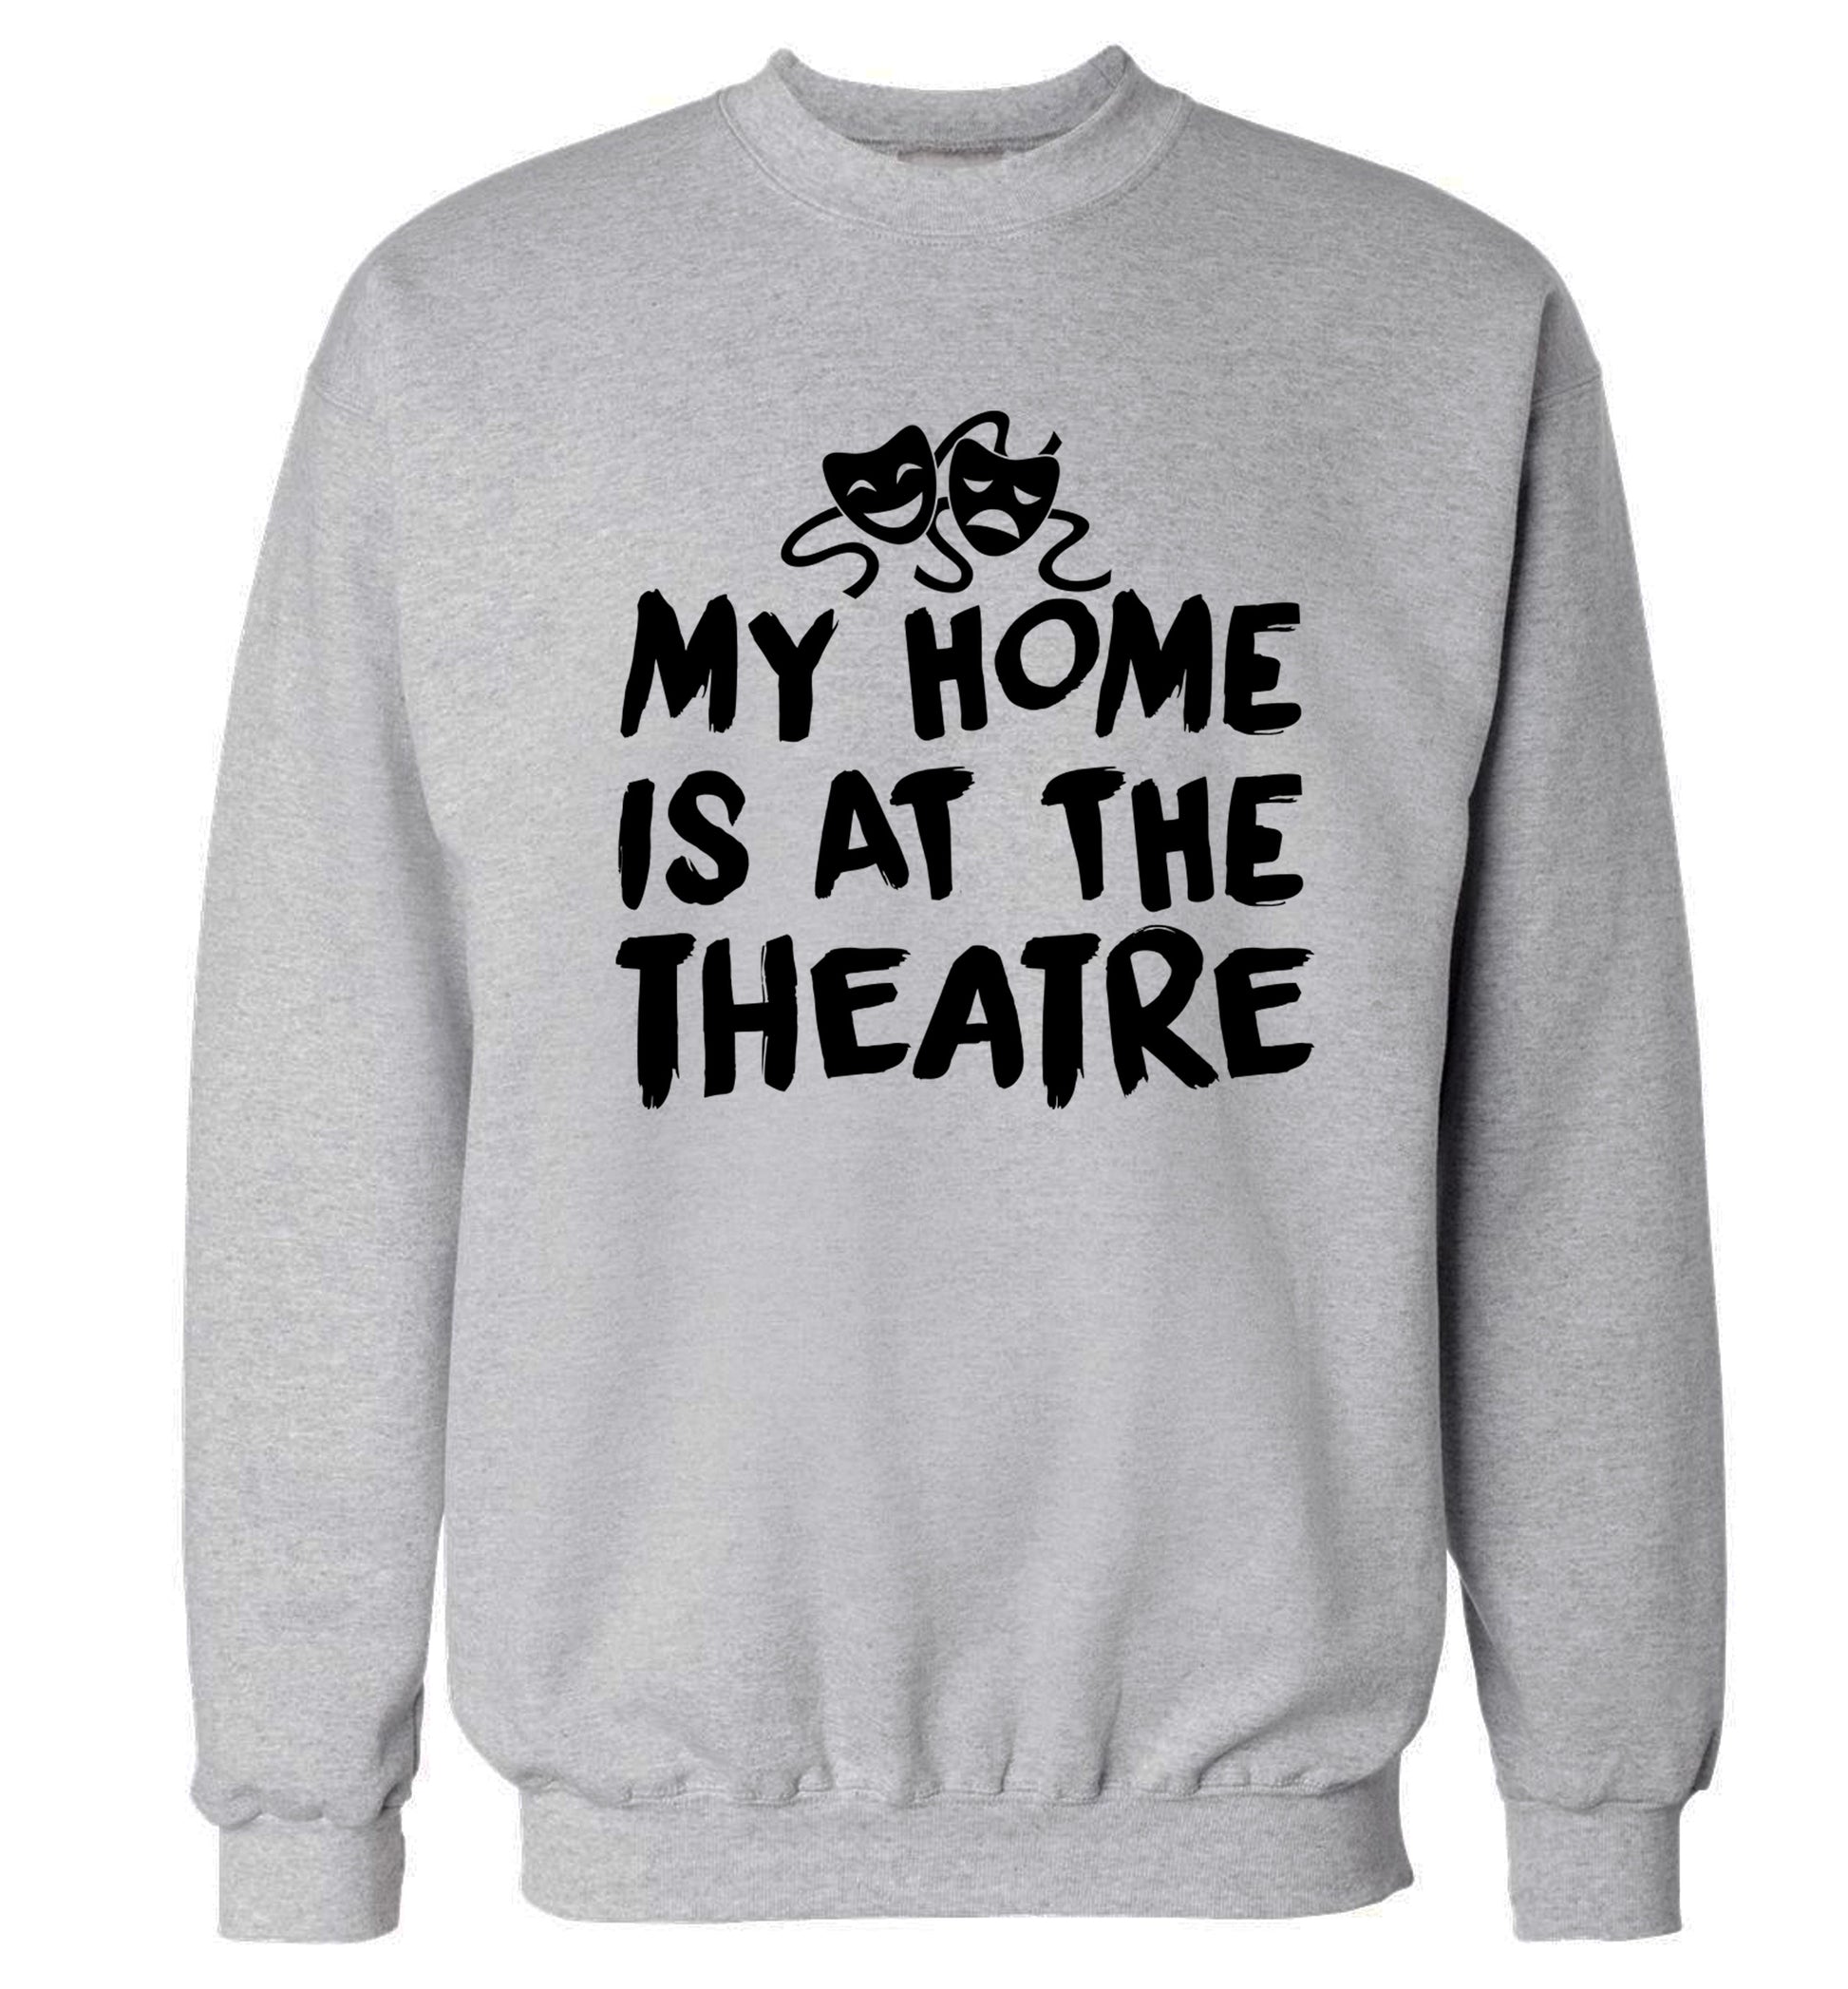 My home is at the theatre Adult's unisex grey Sweater 2XL